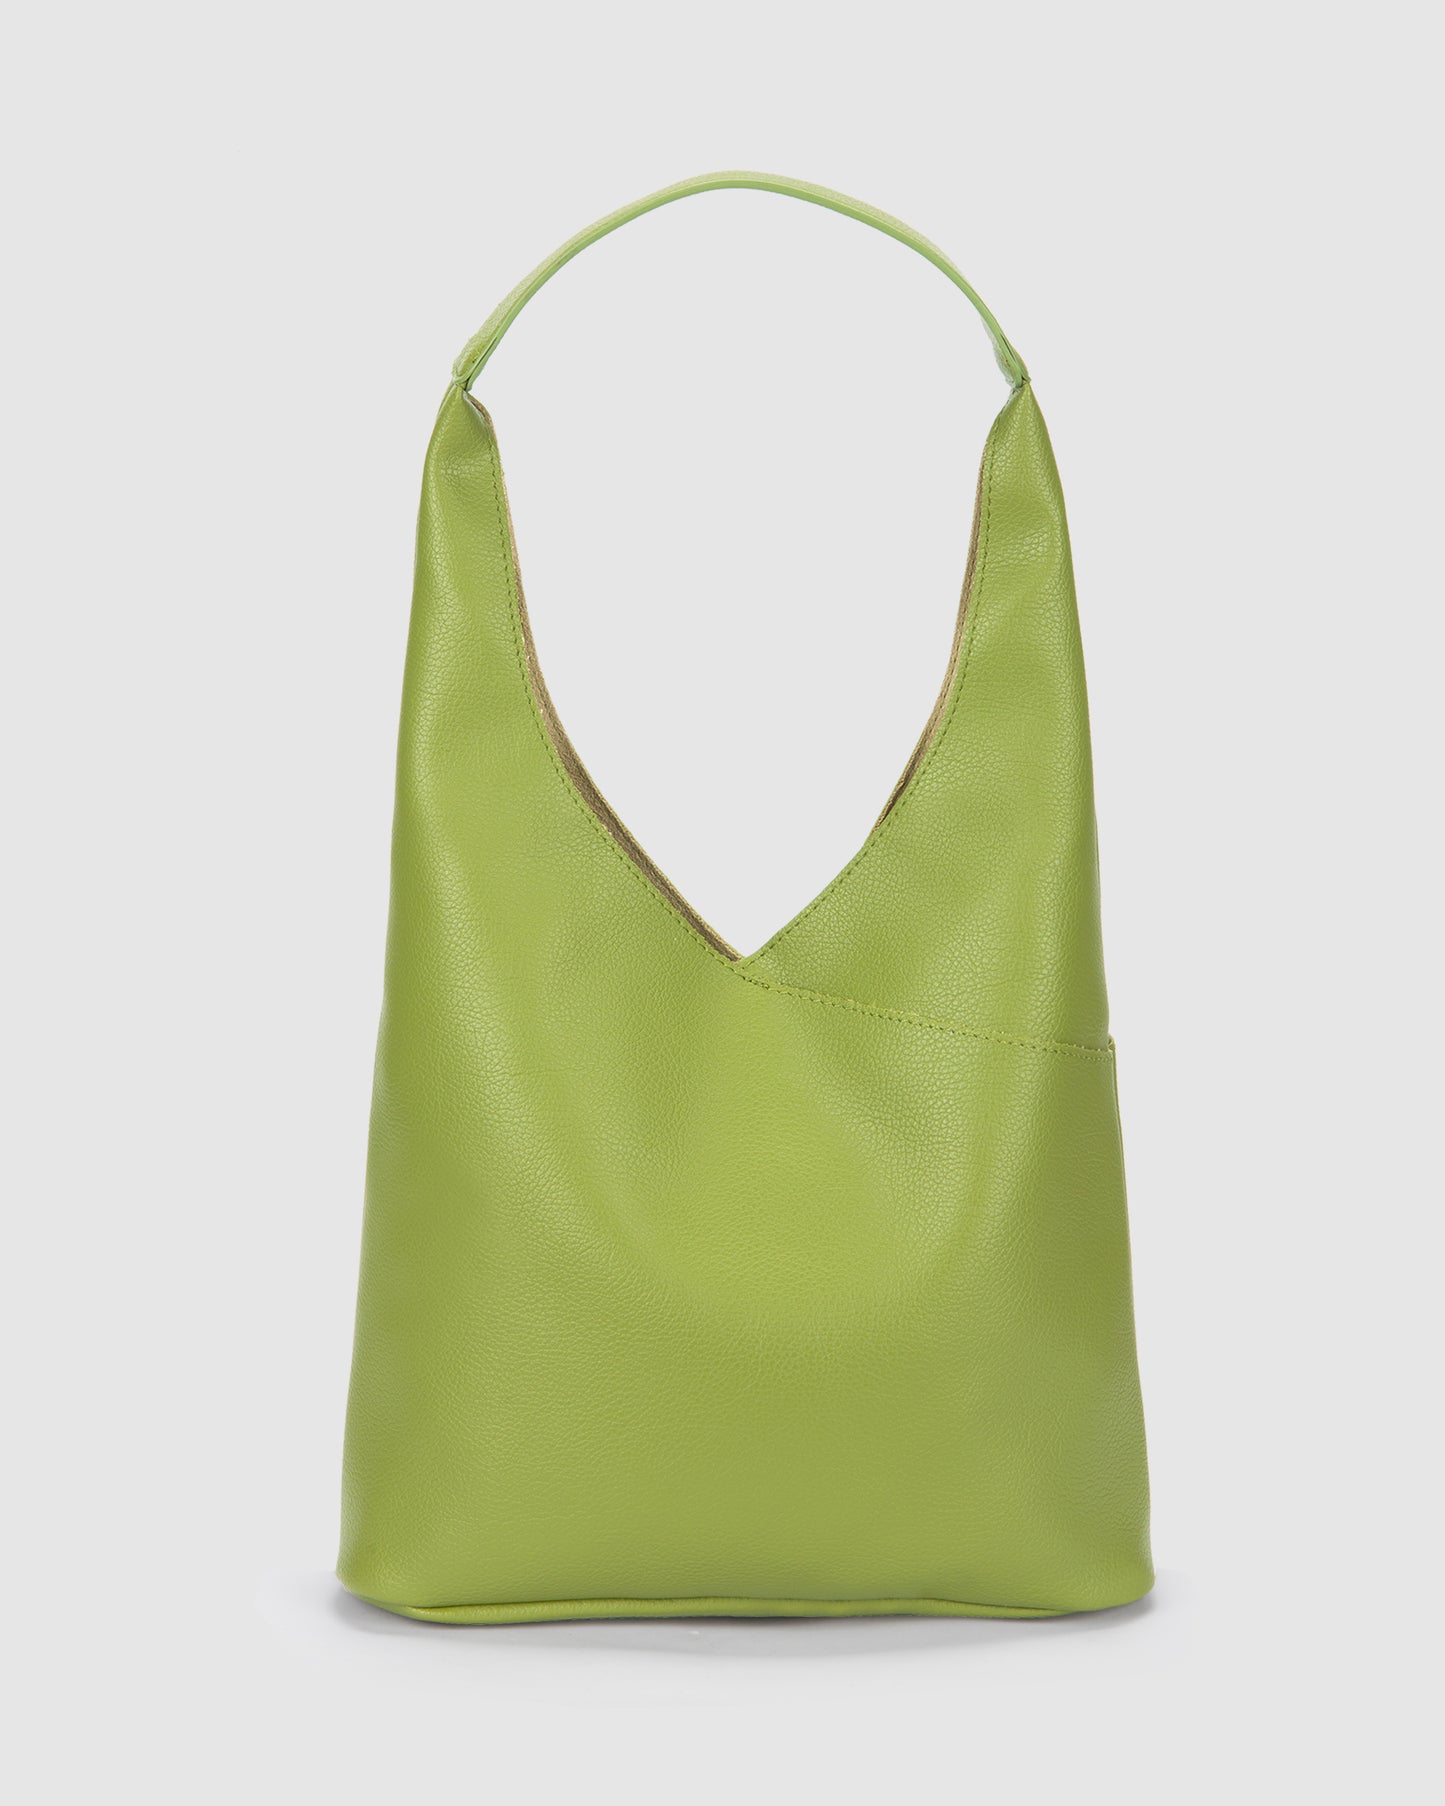 Dulcet Project Women's Trendy Large Capacity Tote Bag-Green